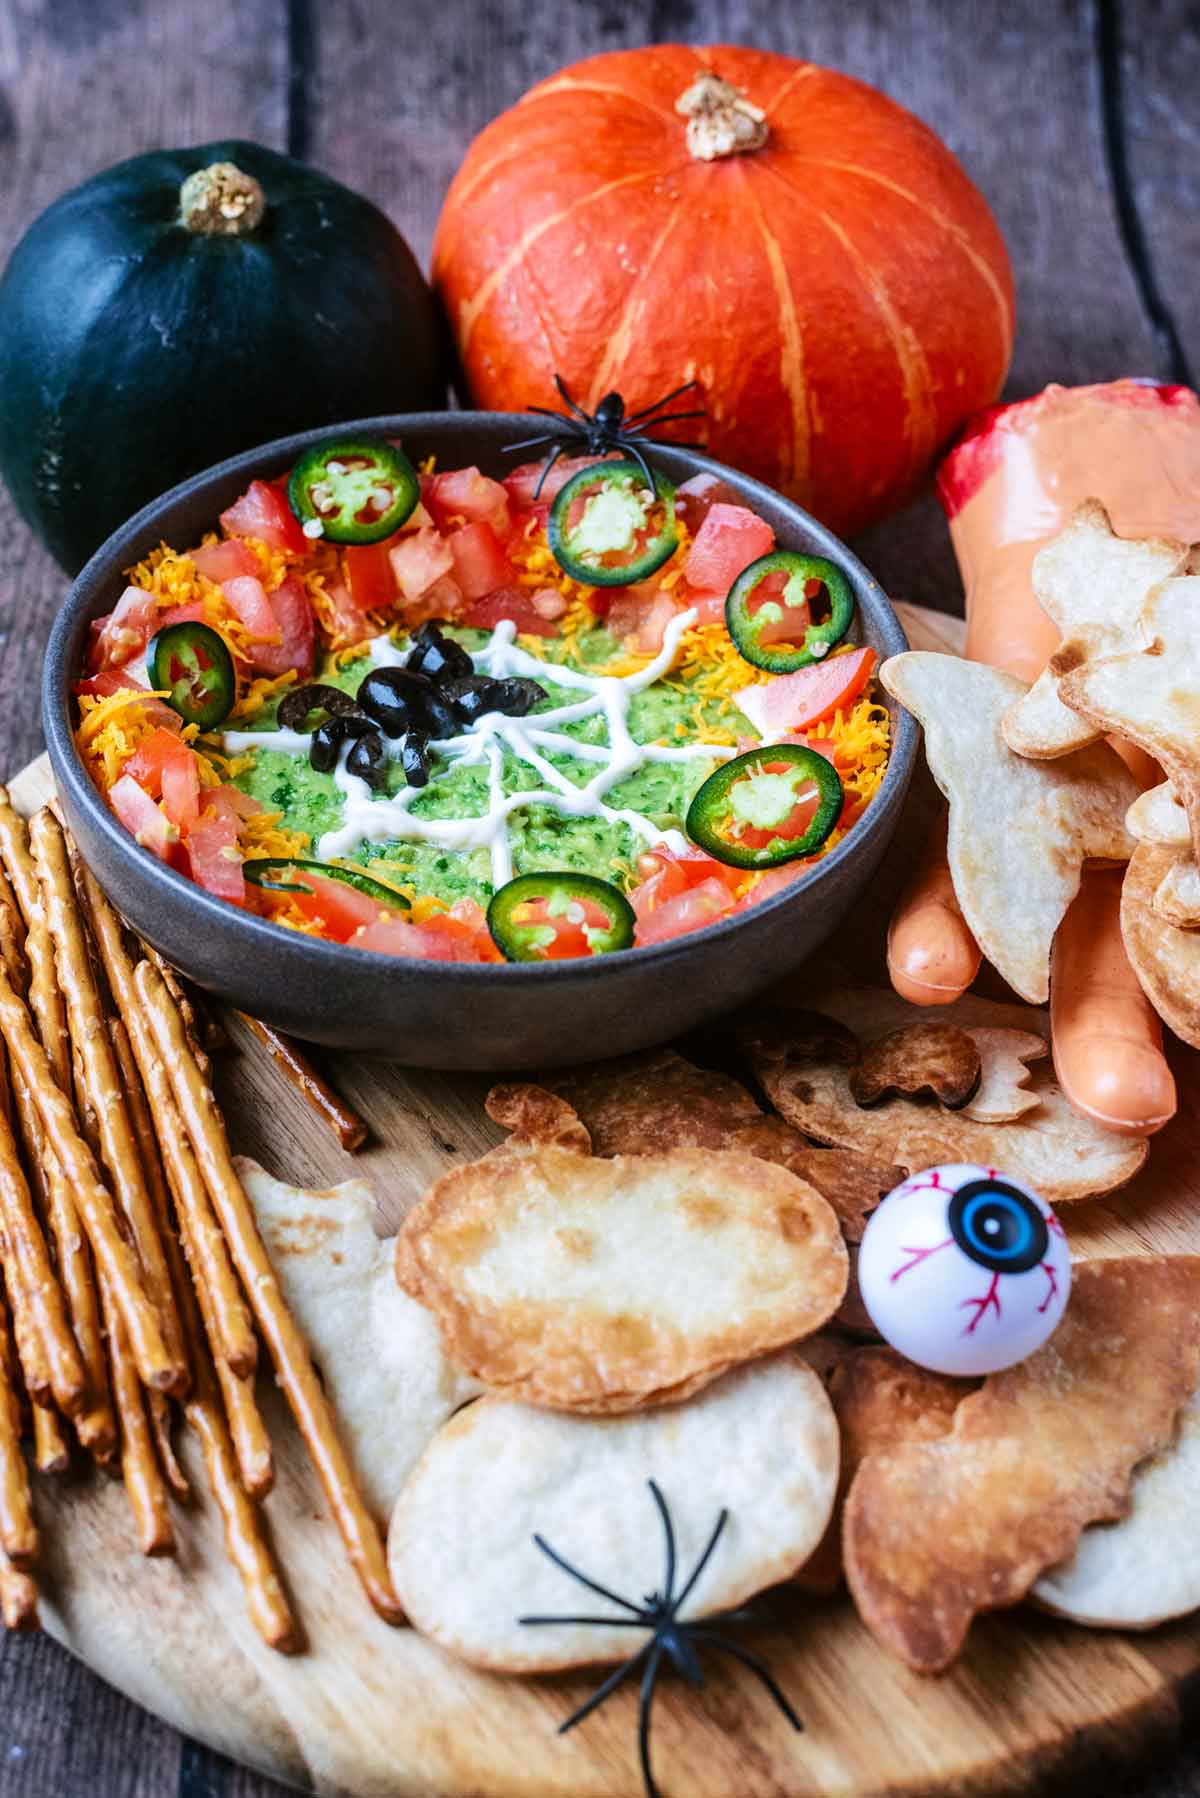 A halloween inspired dip on a wooden board with Halloween shaped tortilla chips.